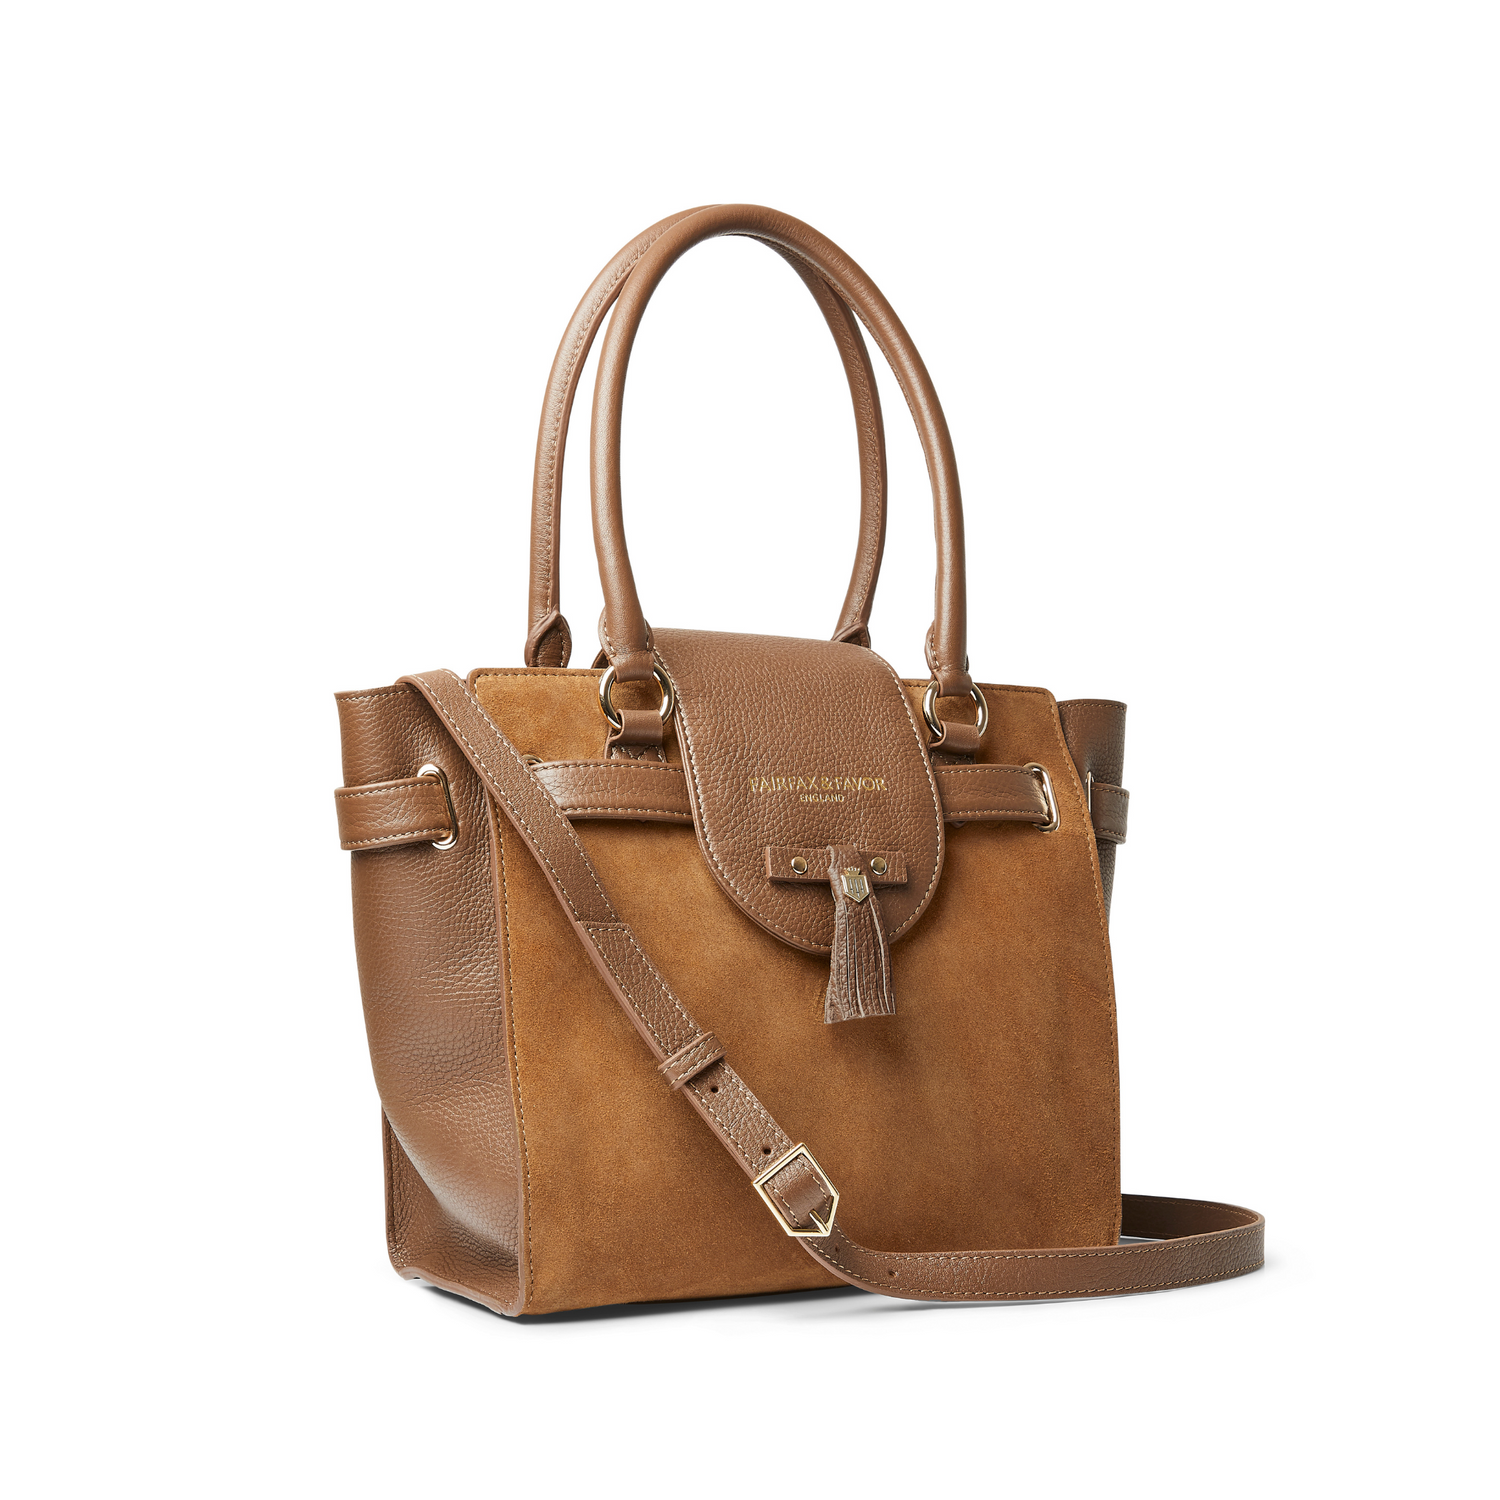 The Windsor Tote Tan Suede